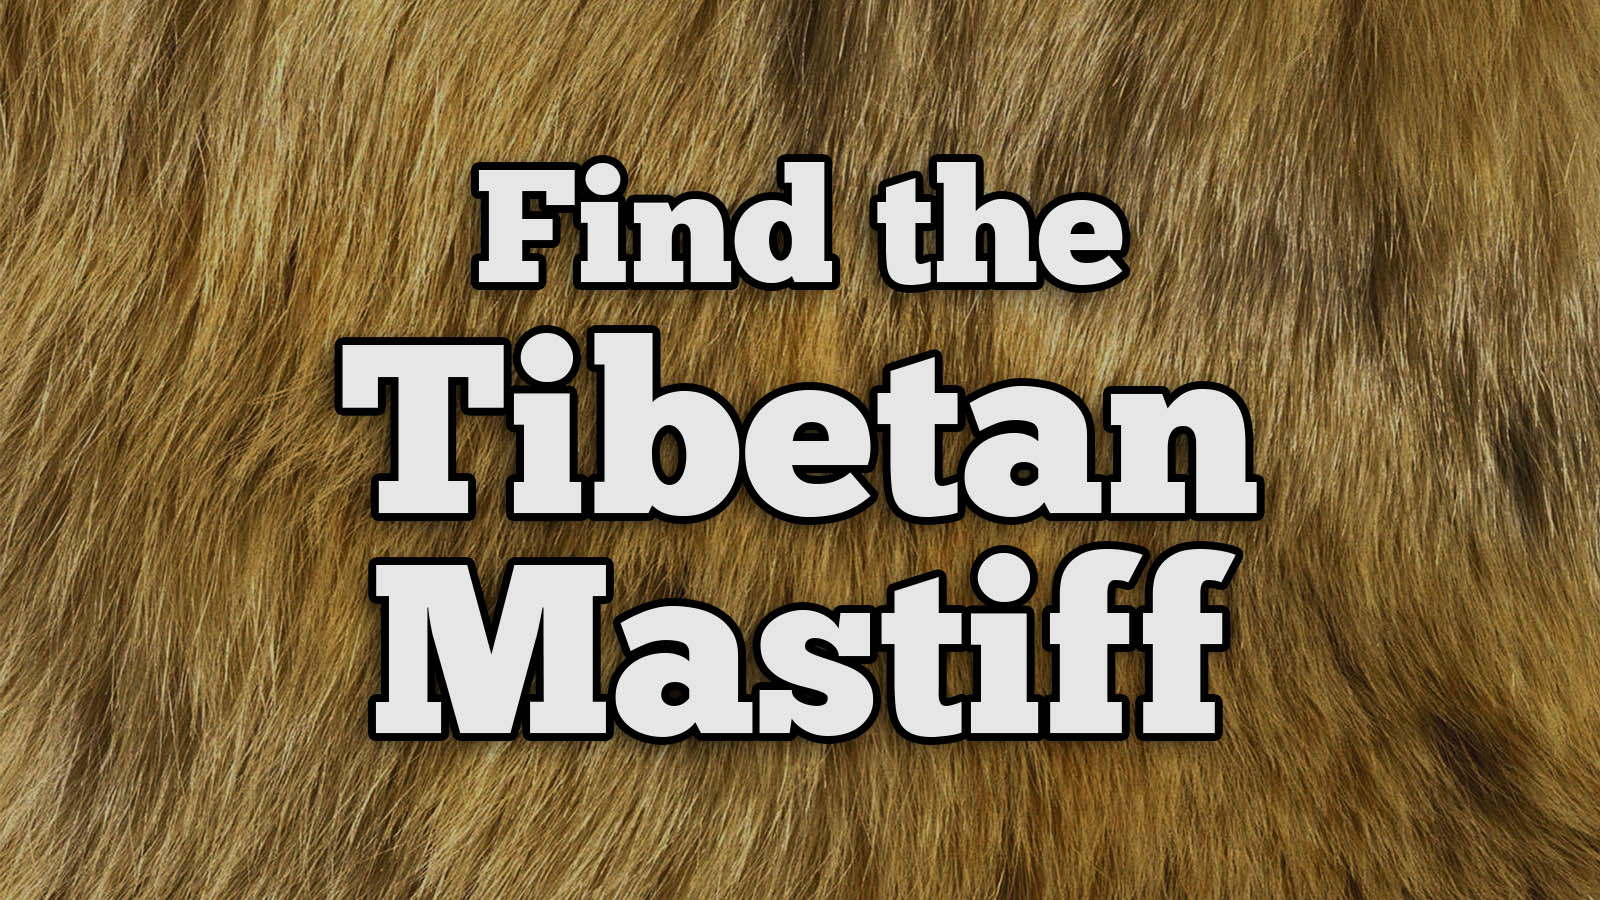 We Bet You Can’t Identify More Than 20/27 of These Dog Breeds Text Tibetan Mastiff